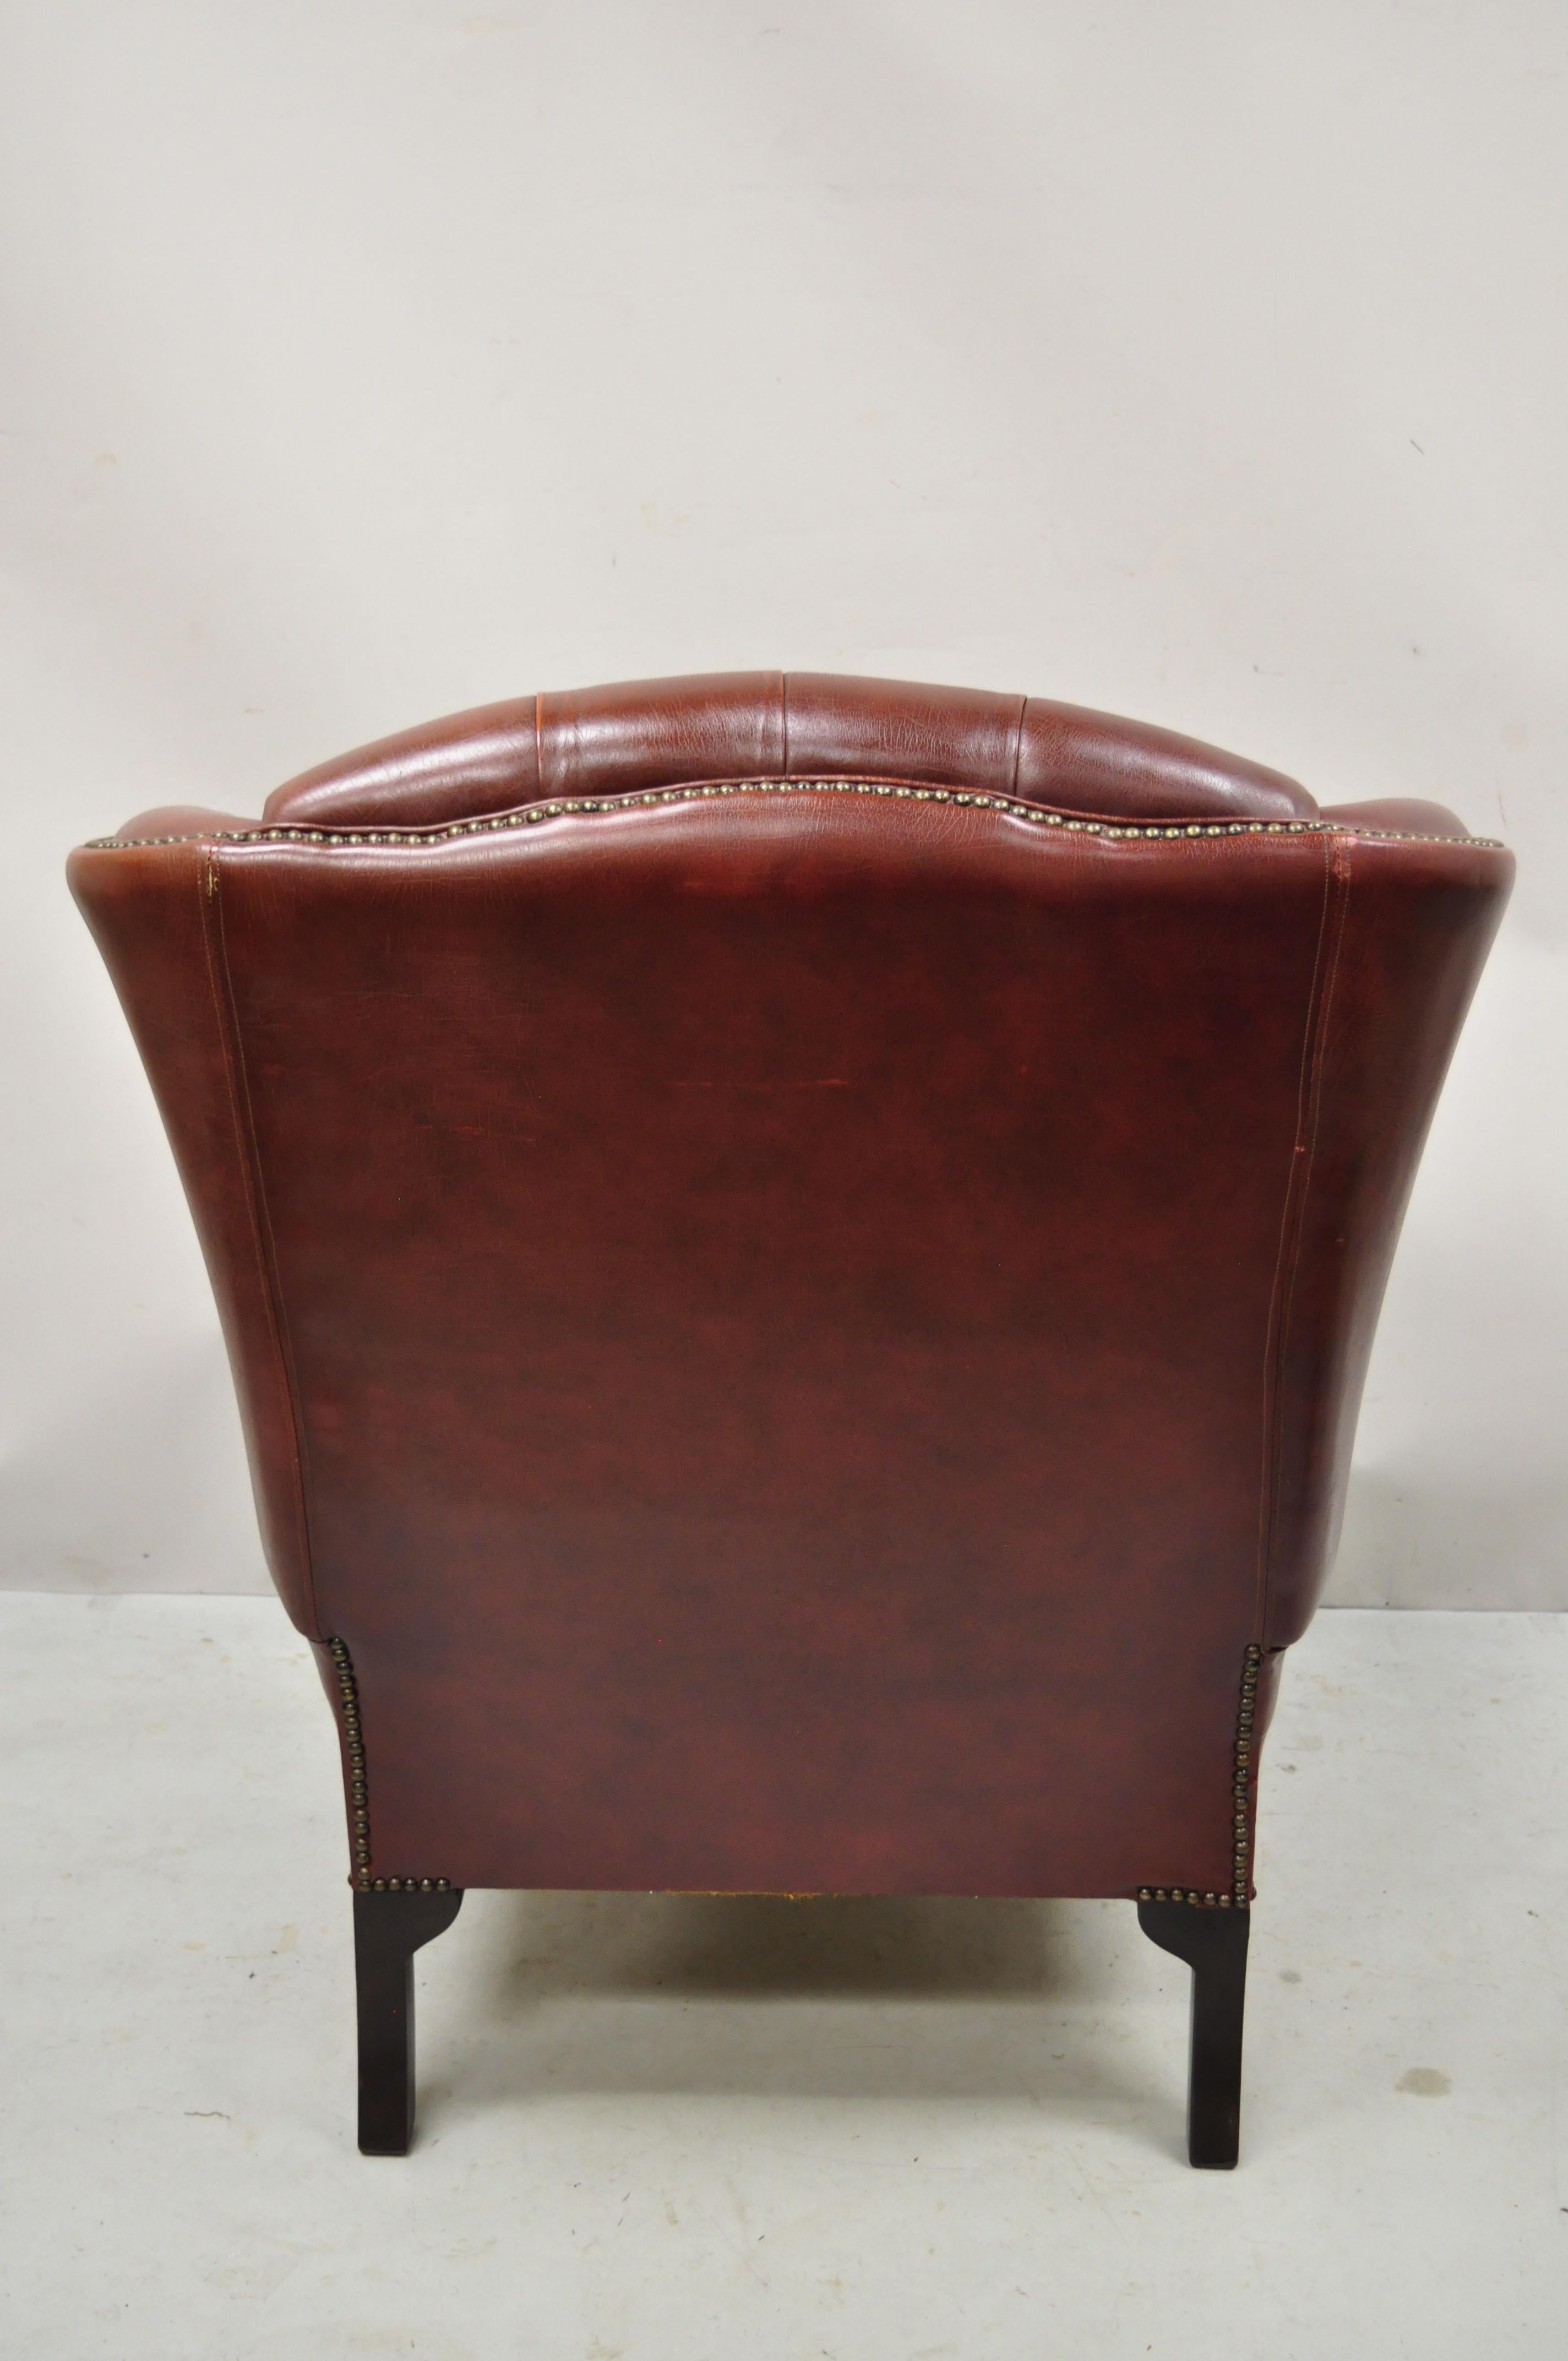 Vintage English Chesterfield Burgundy Leather Tufted Wingback Chair and Ottoman 2